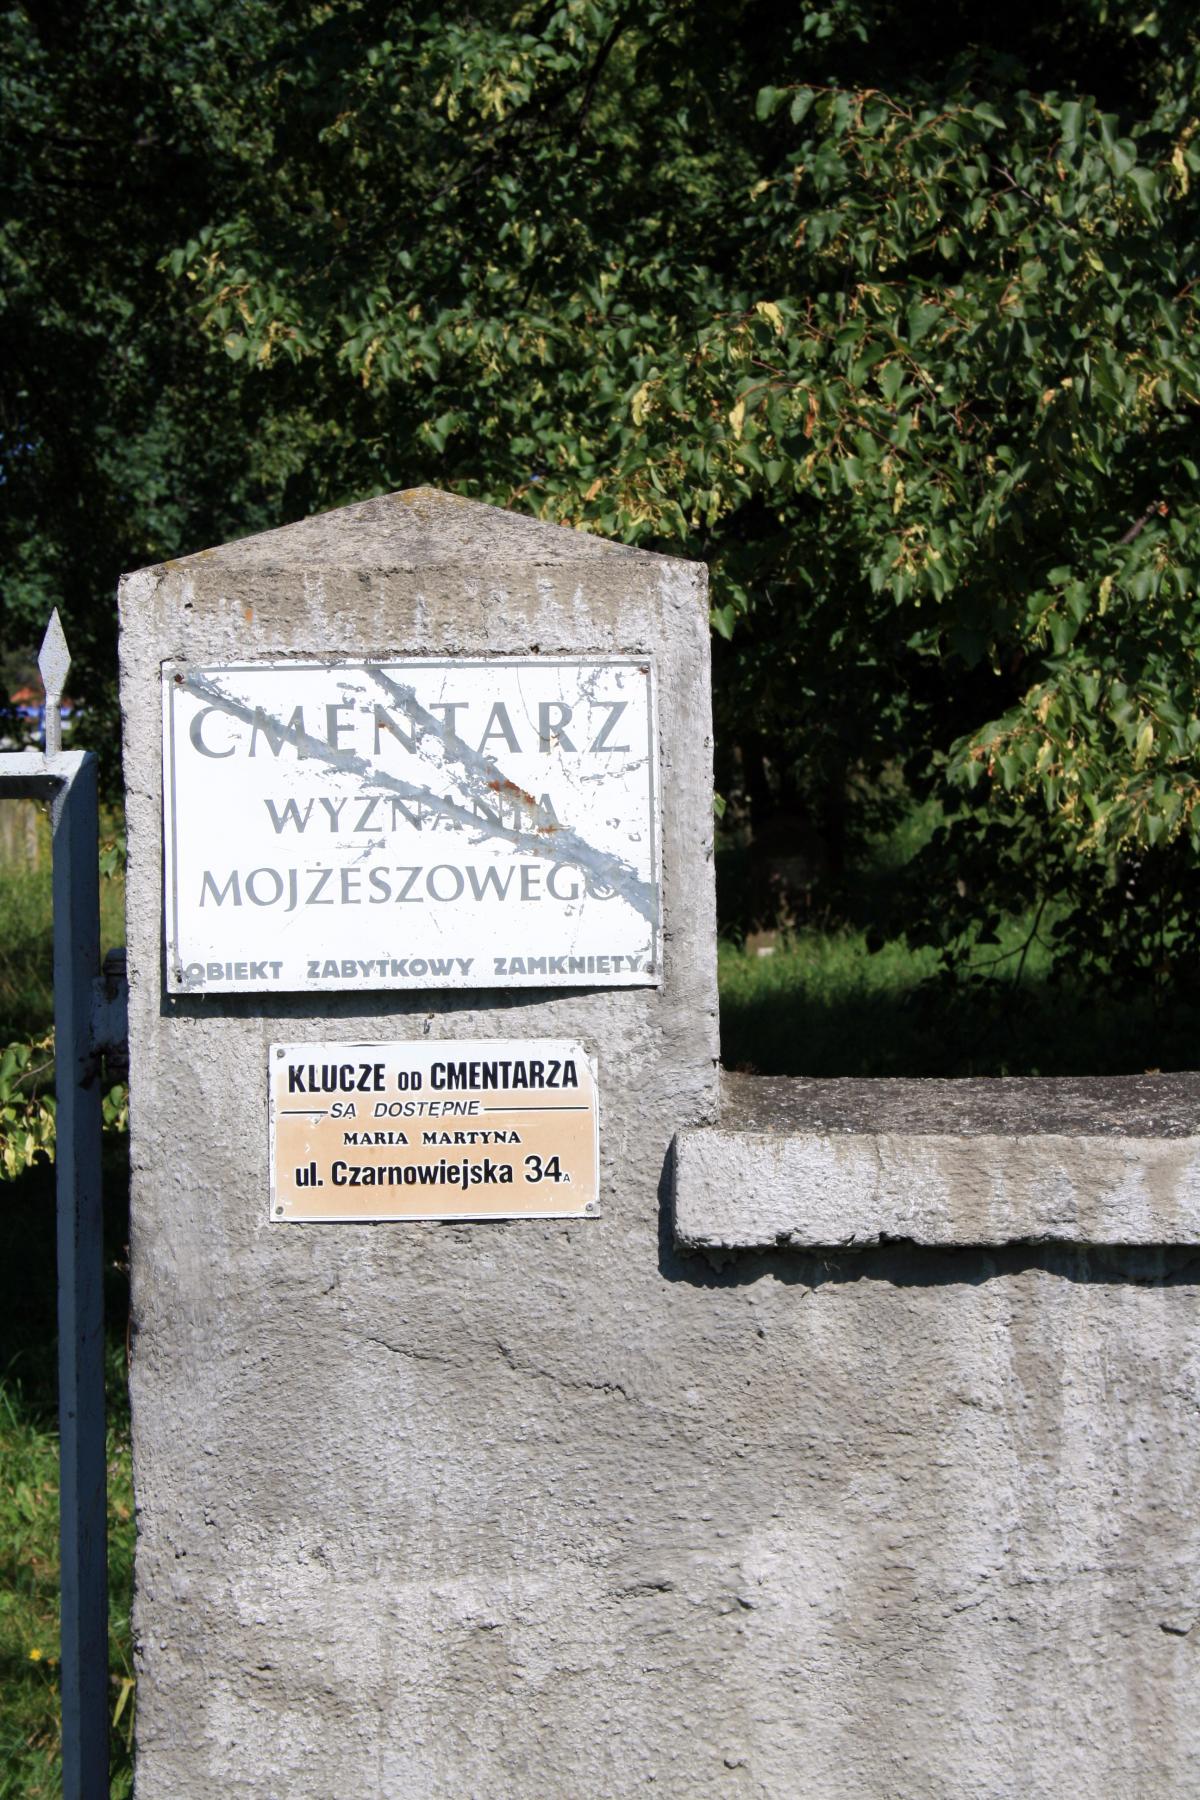 Wikipedia, Cultural heritage monuments in Poland with known IDs, Jewish cemetery gates, Jewish cemet